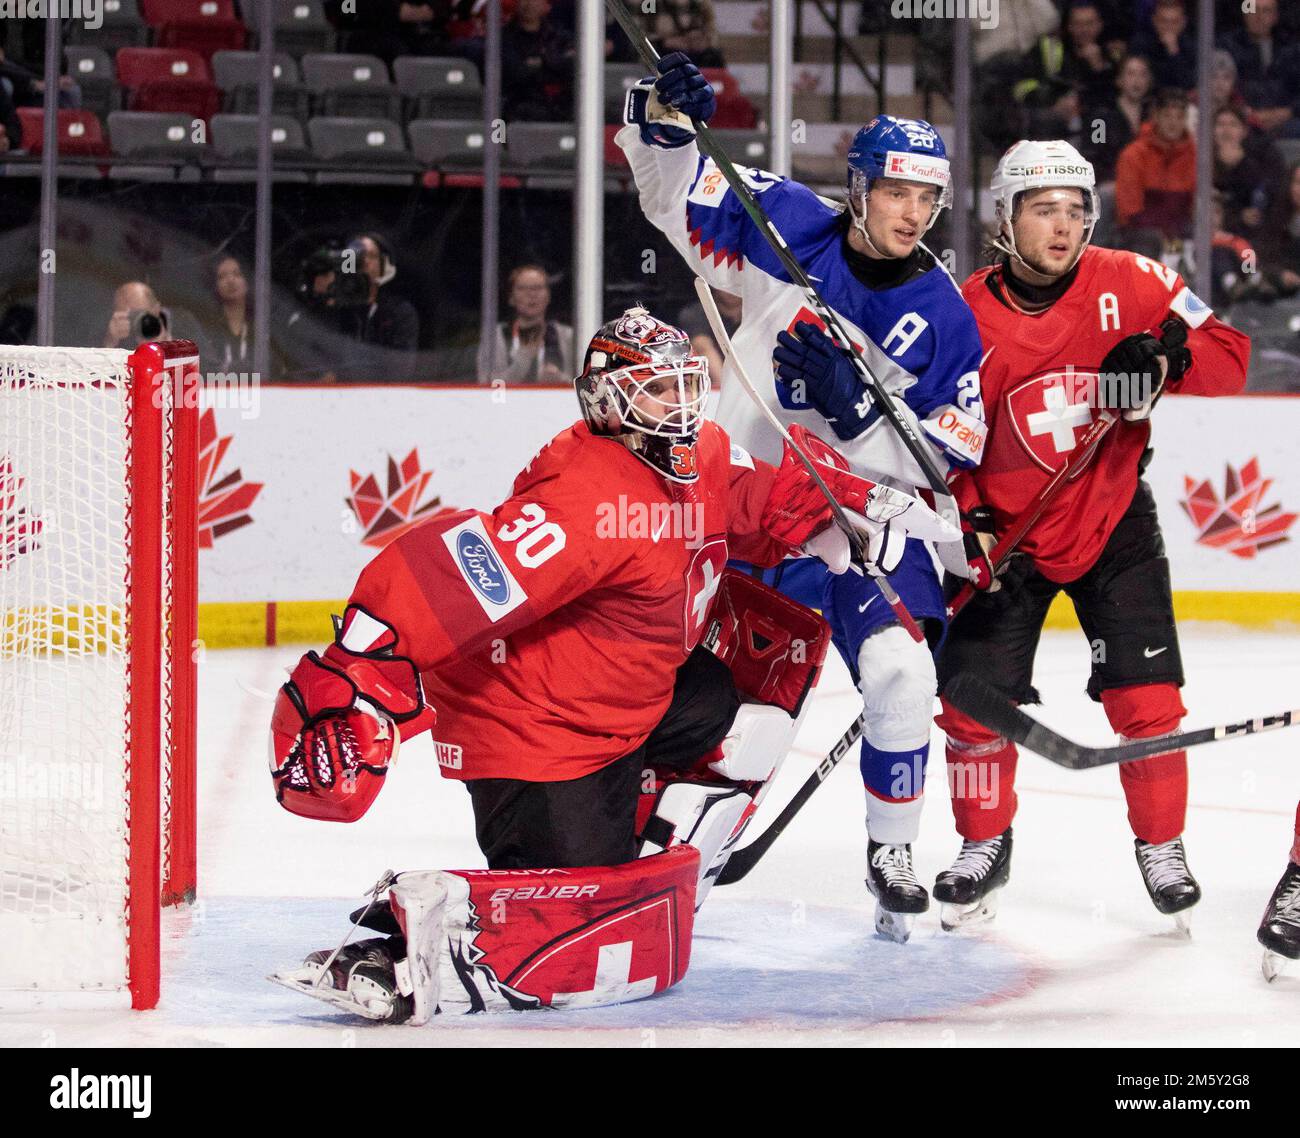 December 31, 2022, Moncton, NB, Canada: Switzerland goaltender Kevin Pasche  tries to keep his balance as Slovakia's Lian Bicsel and Switzerland's Libor  Nemec battle in front of the net during third period